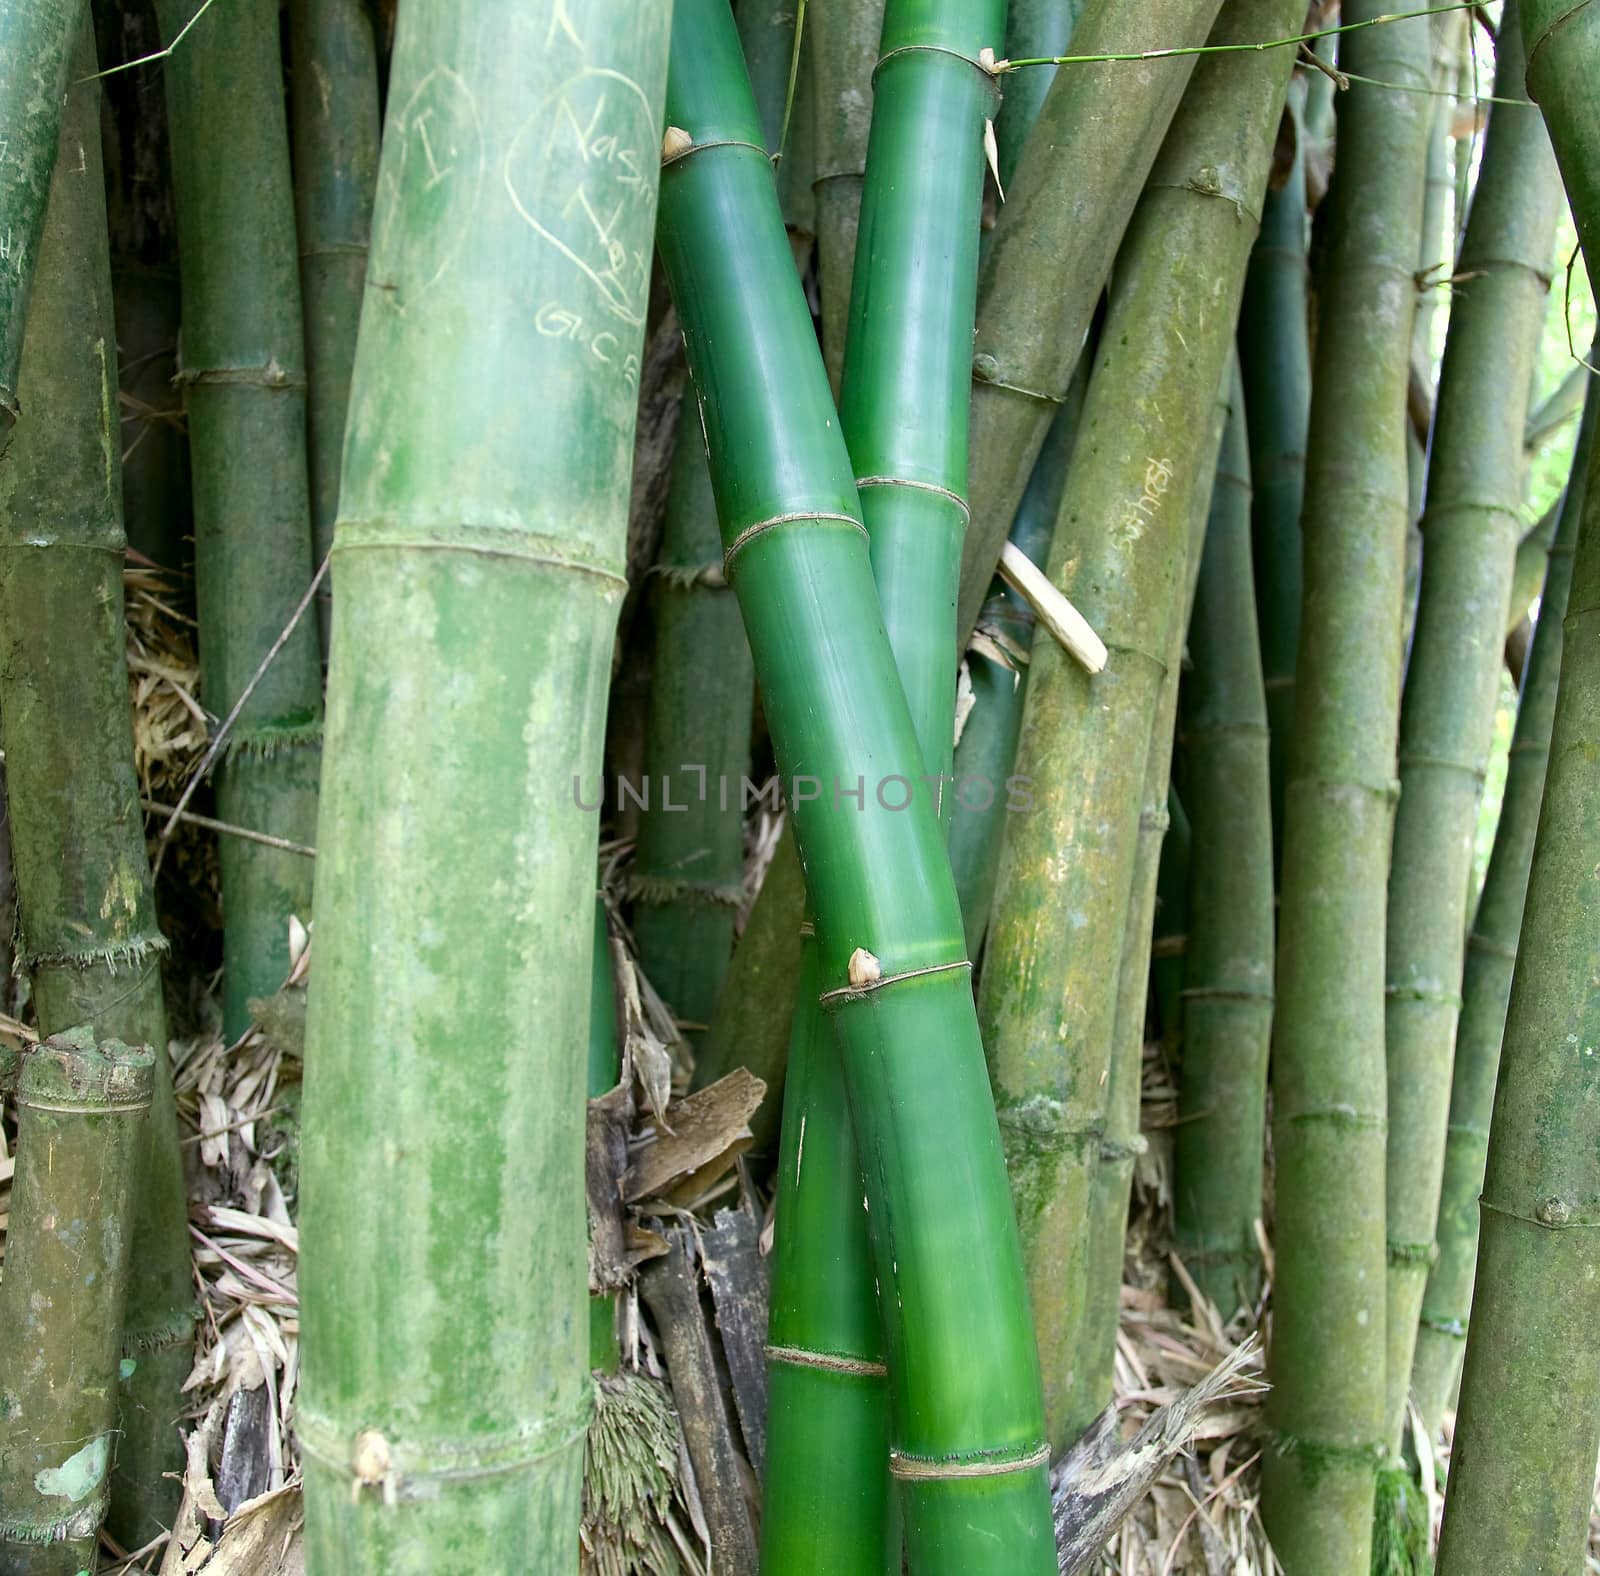 Canes of giant bamboo in the Royal Botanical Gardens by foryouinf